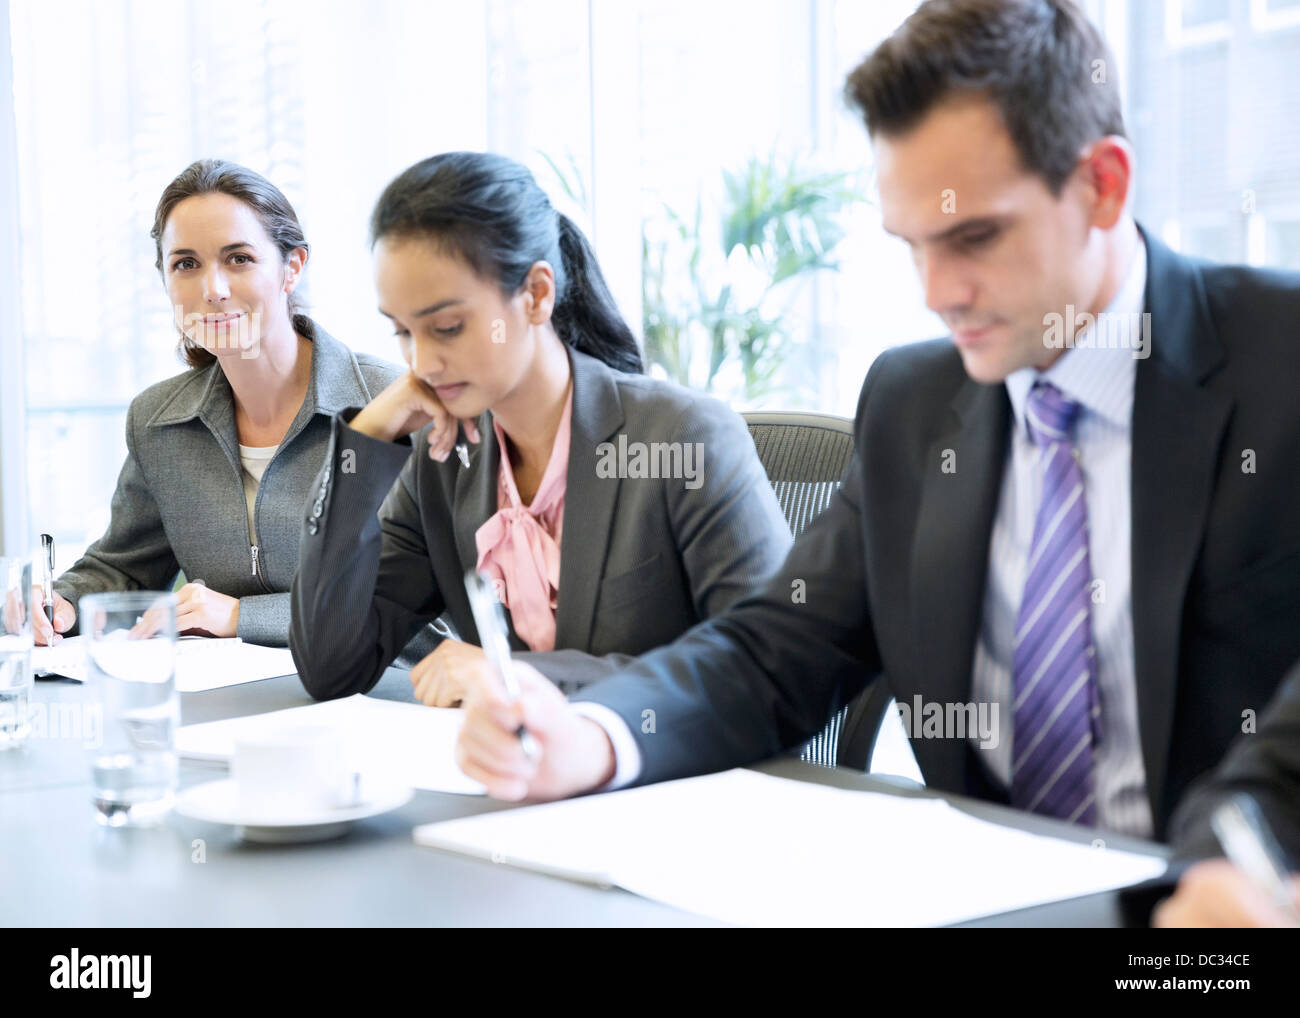 Portrait of smiling businesswoman in meeting Banque D'Images